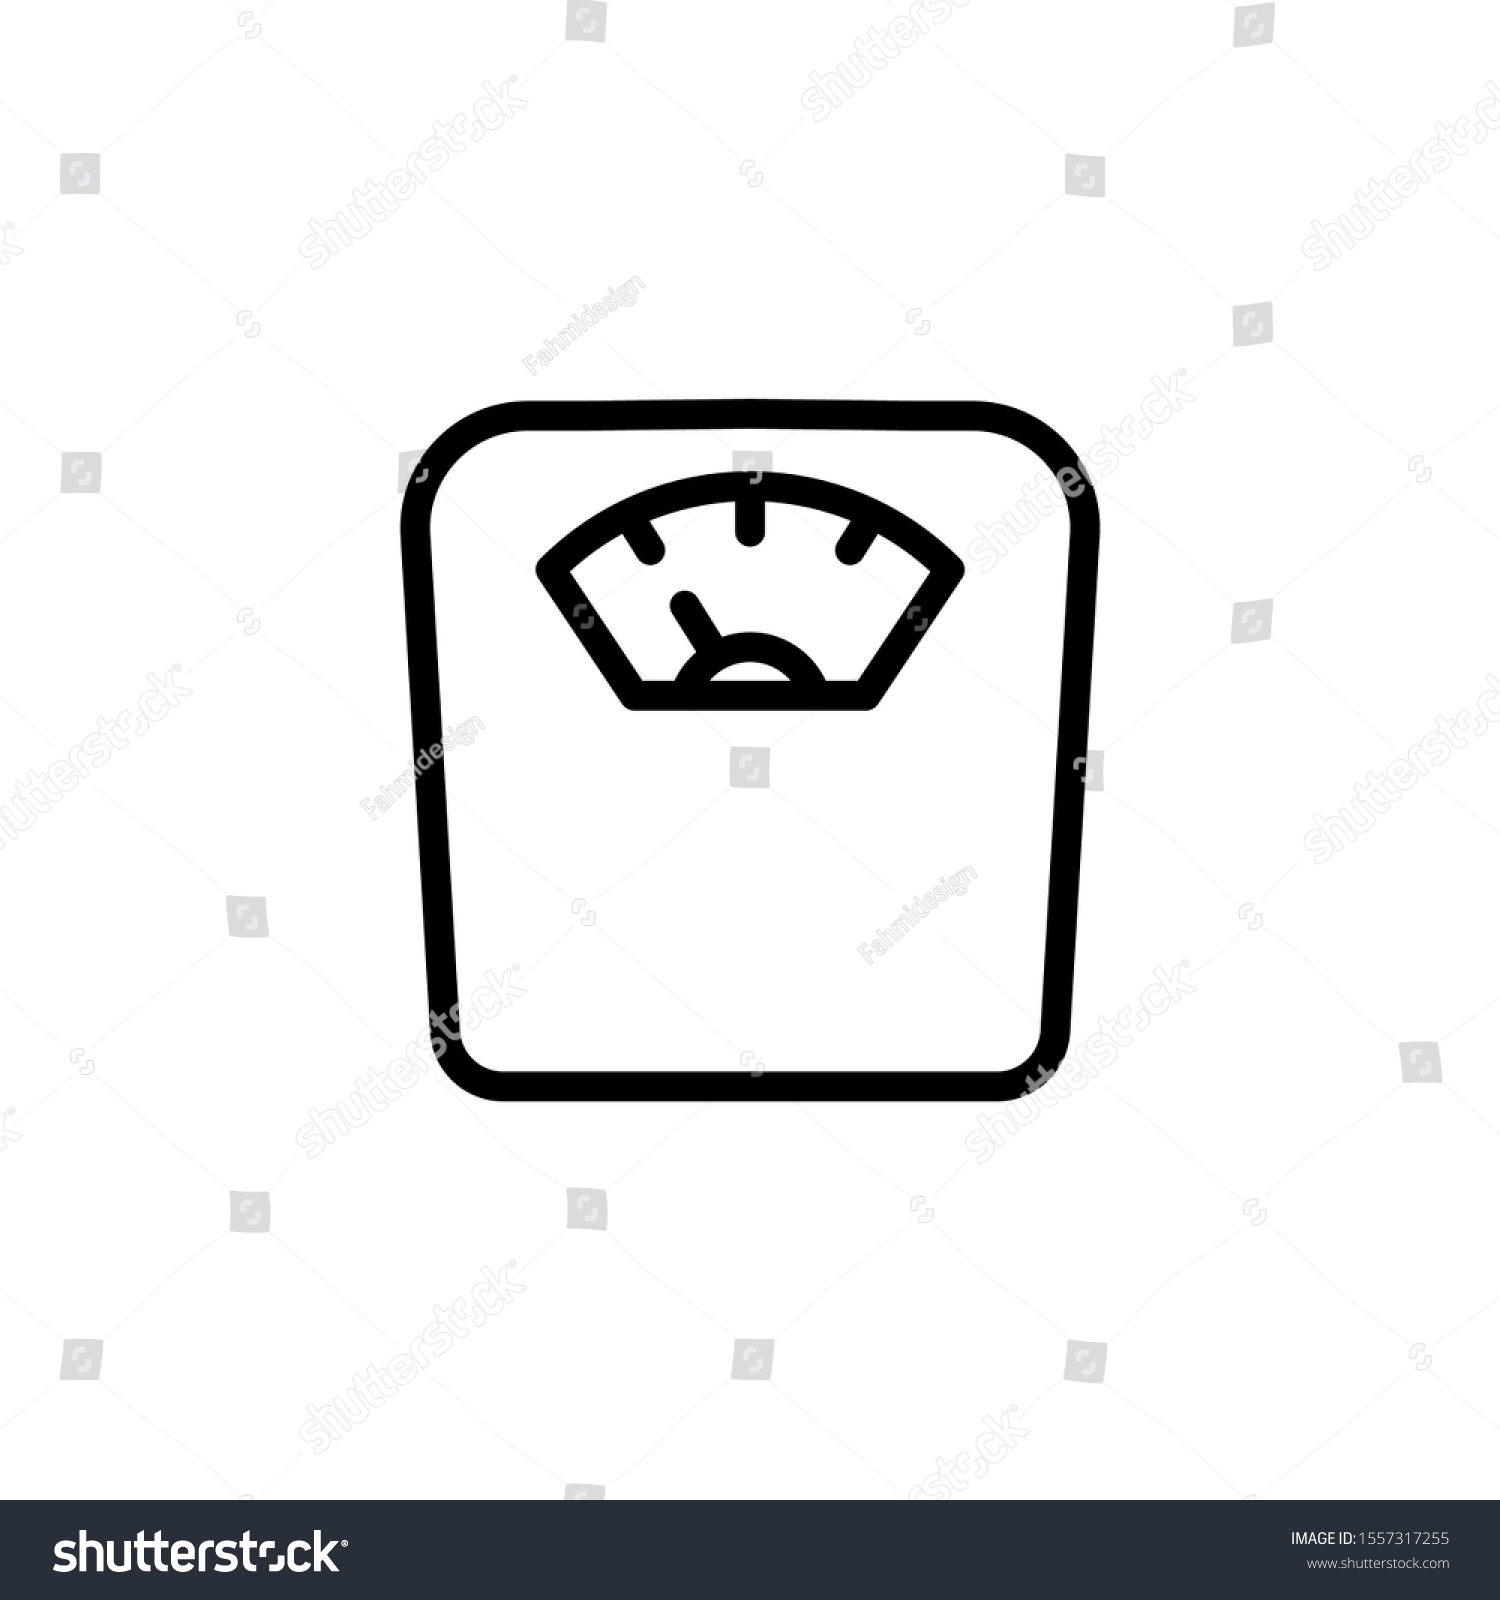 SVG of diet scale icon in line art style, From Fitness, Health and activity icons, sports icons svg